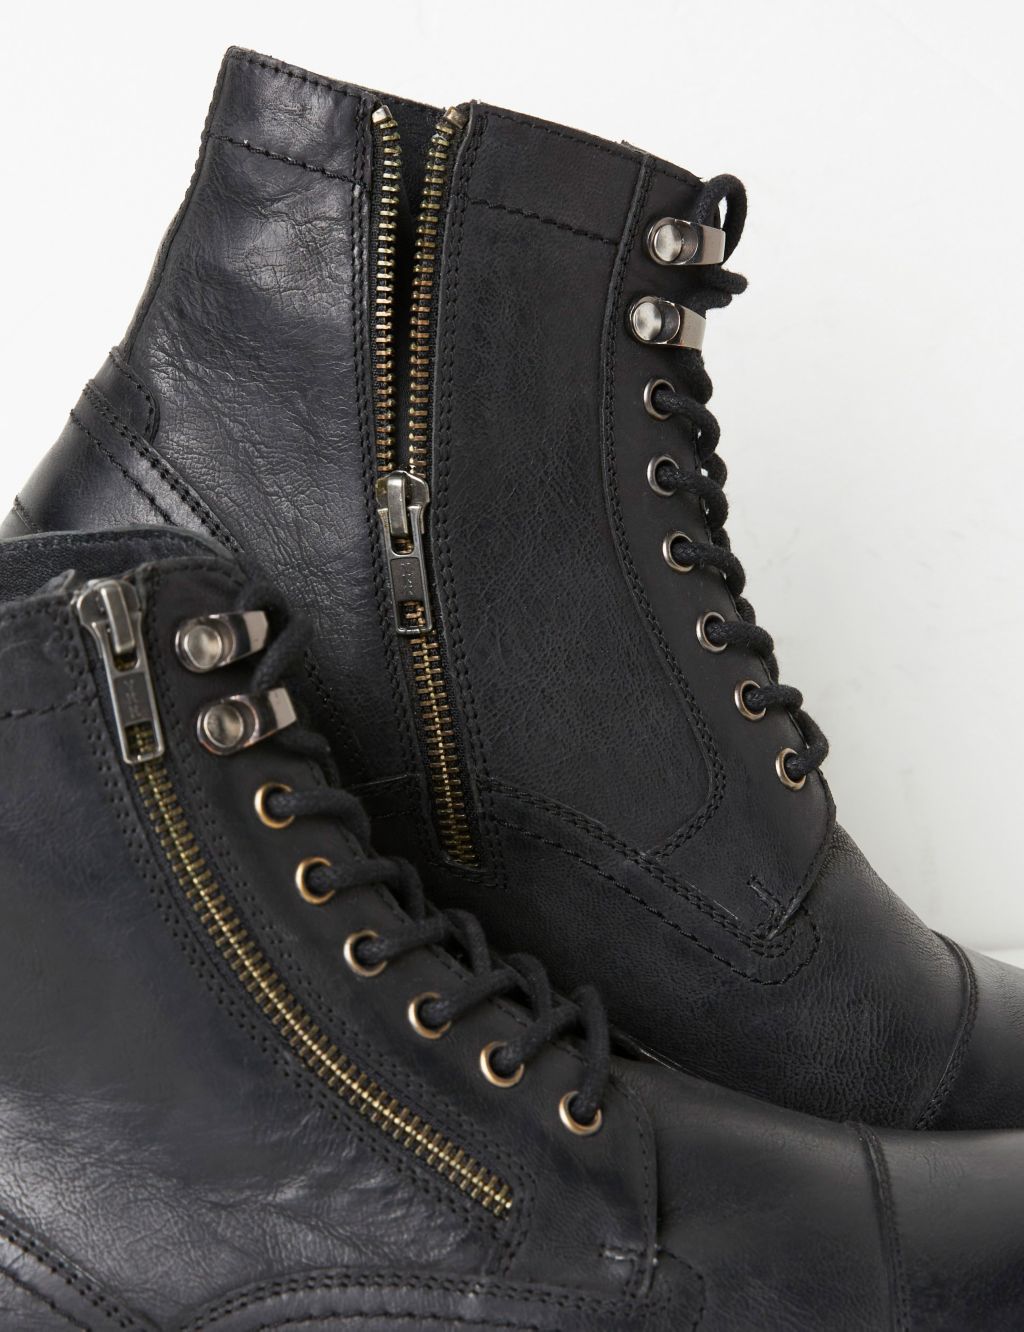 Leather Side Zip Casual Boots image 4